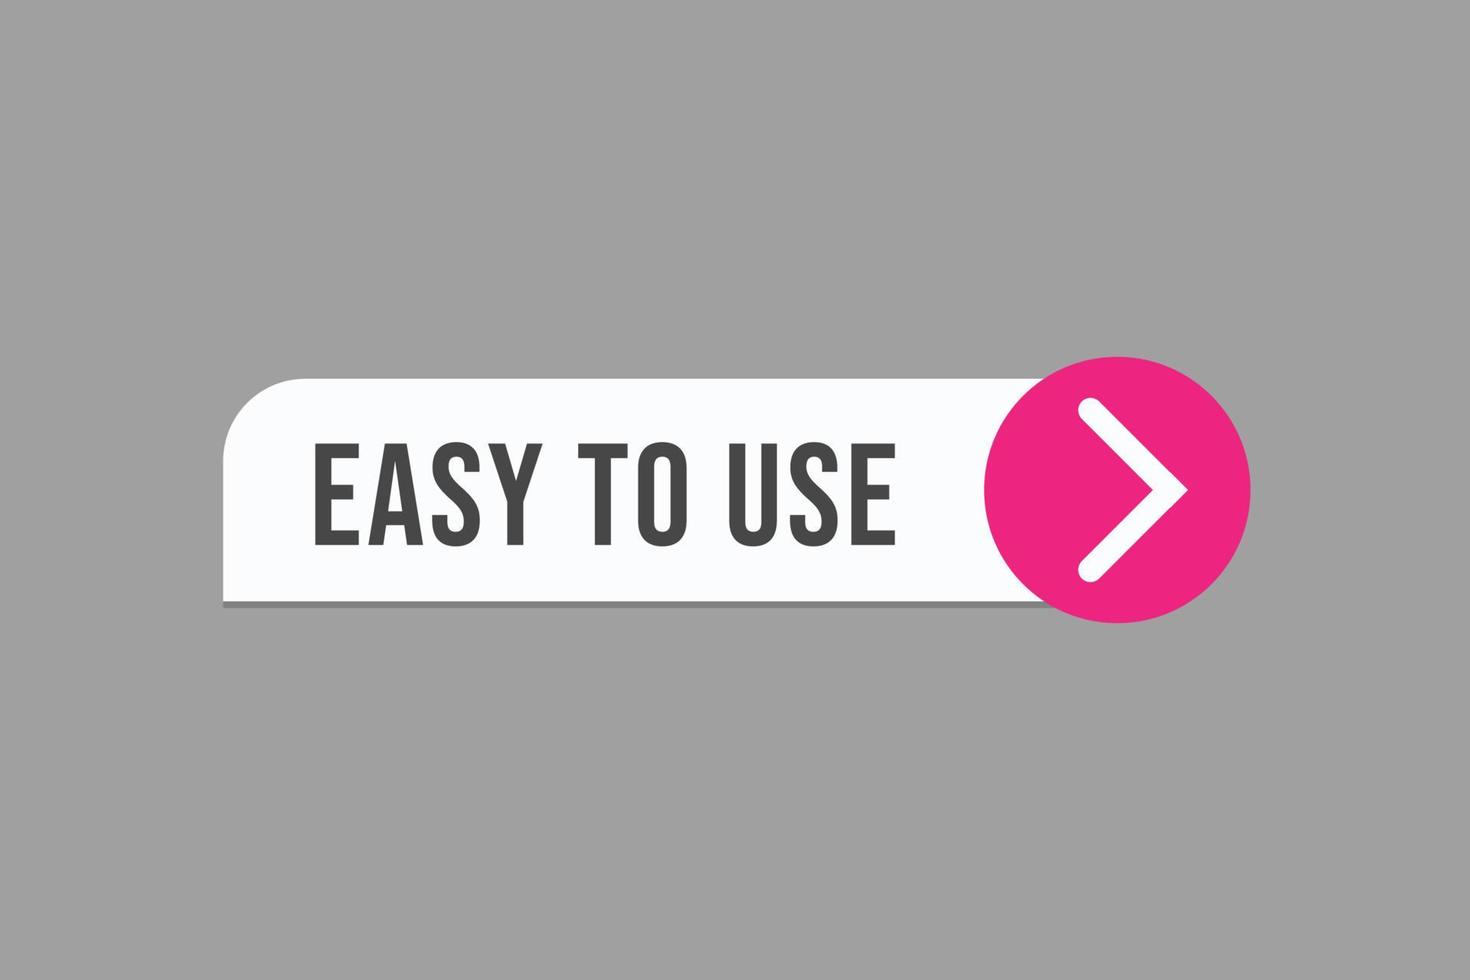 easy to use button vectors. sign label speech bubble easy to use vector